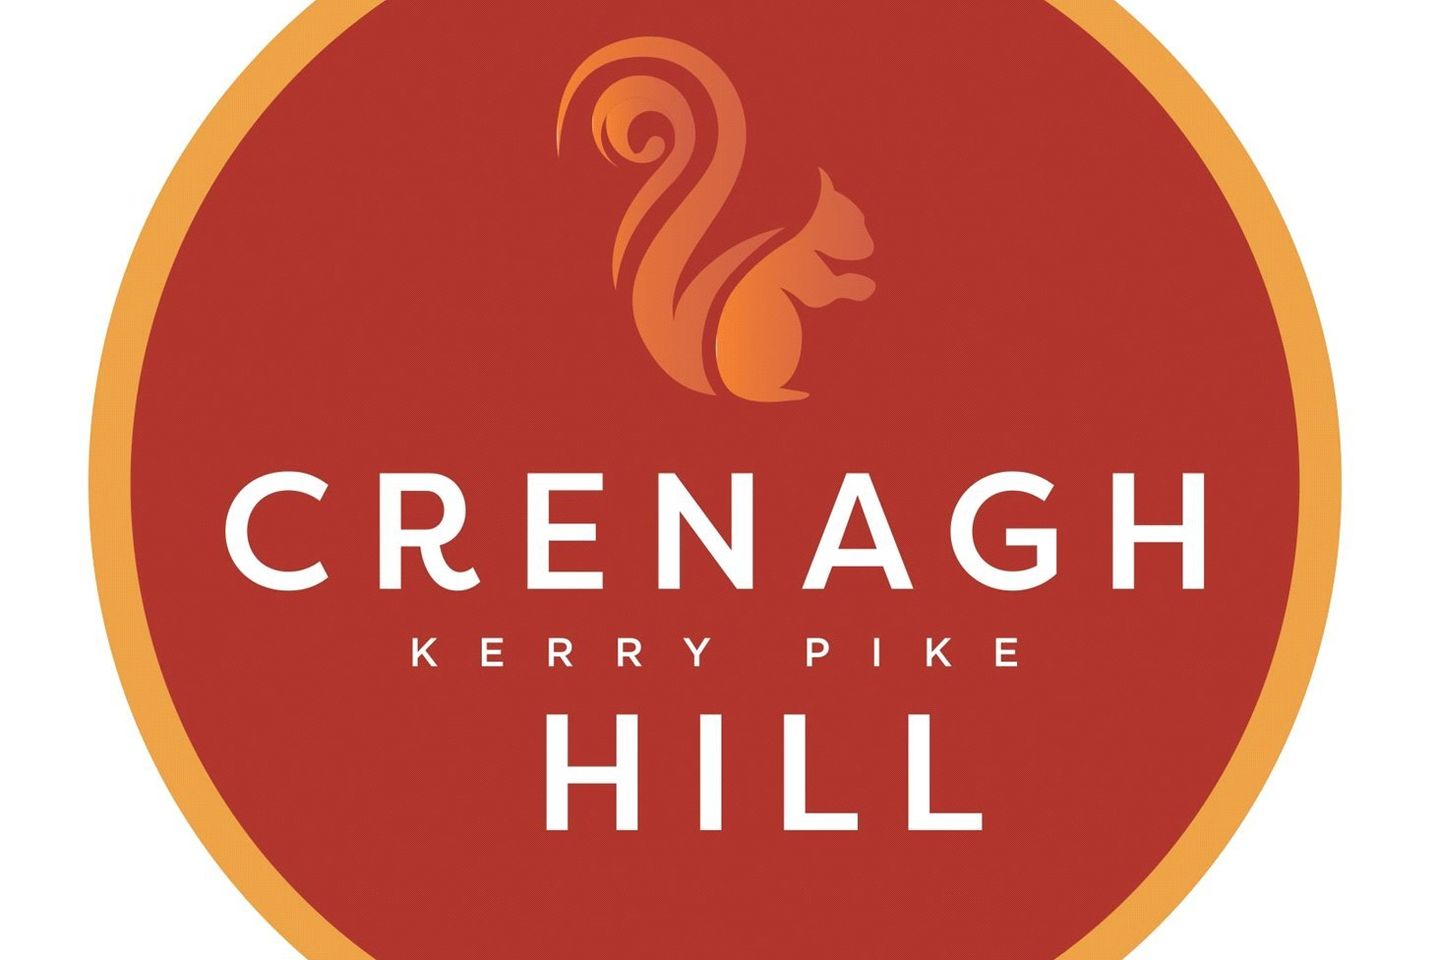 3 Bed End Terrace, Crenagh Hill, 3 Bed End Terrace, Crenagh Hill, Kerry Pike, Co. Cork